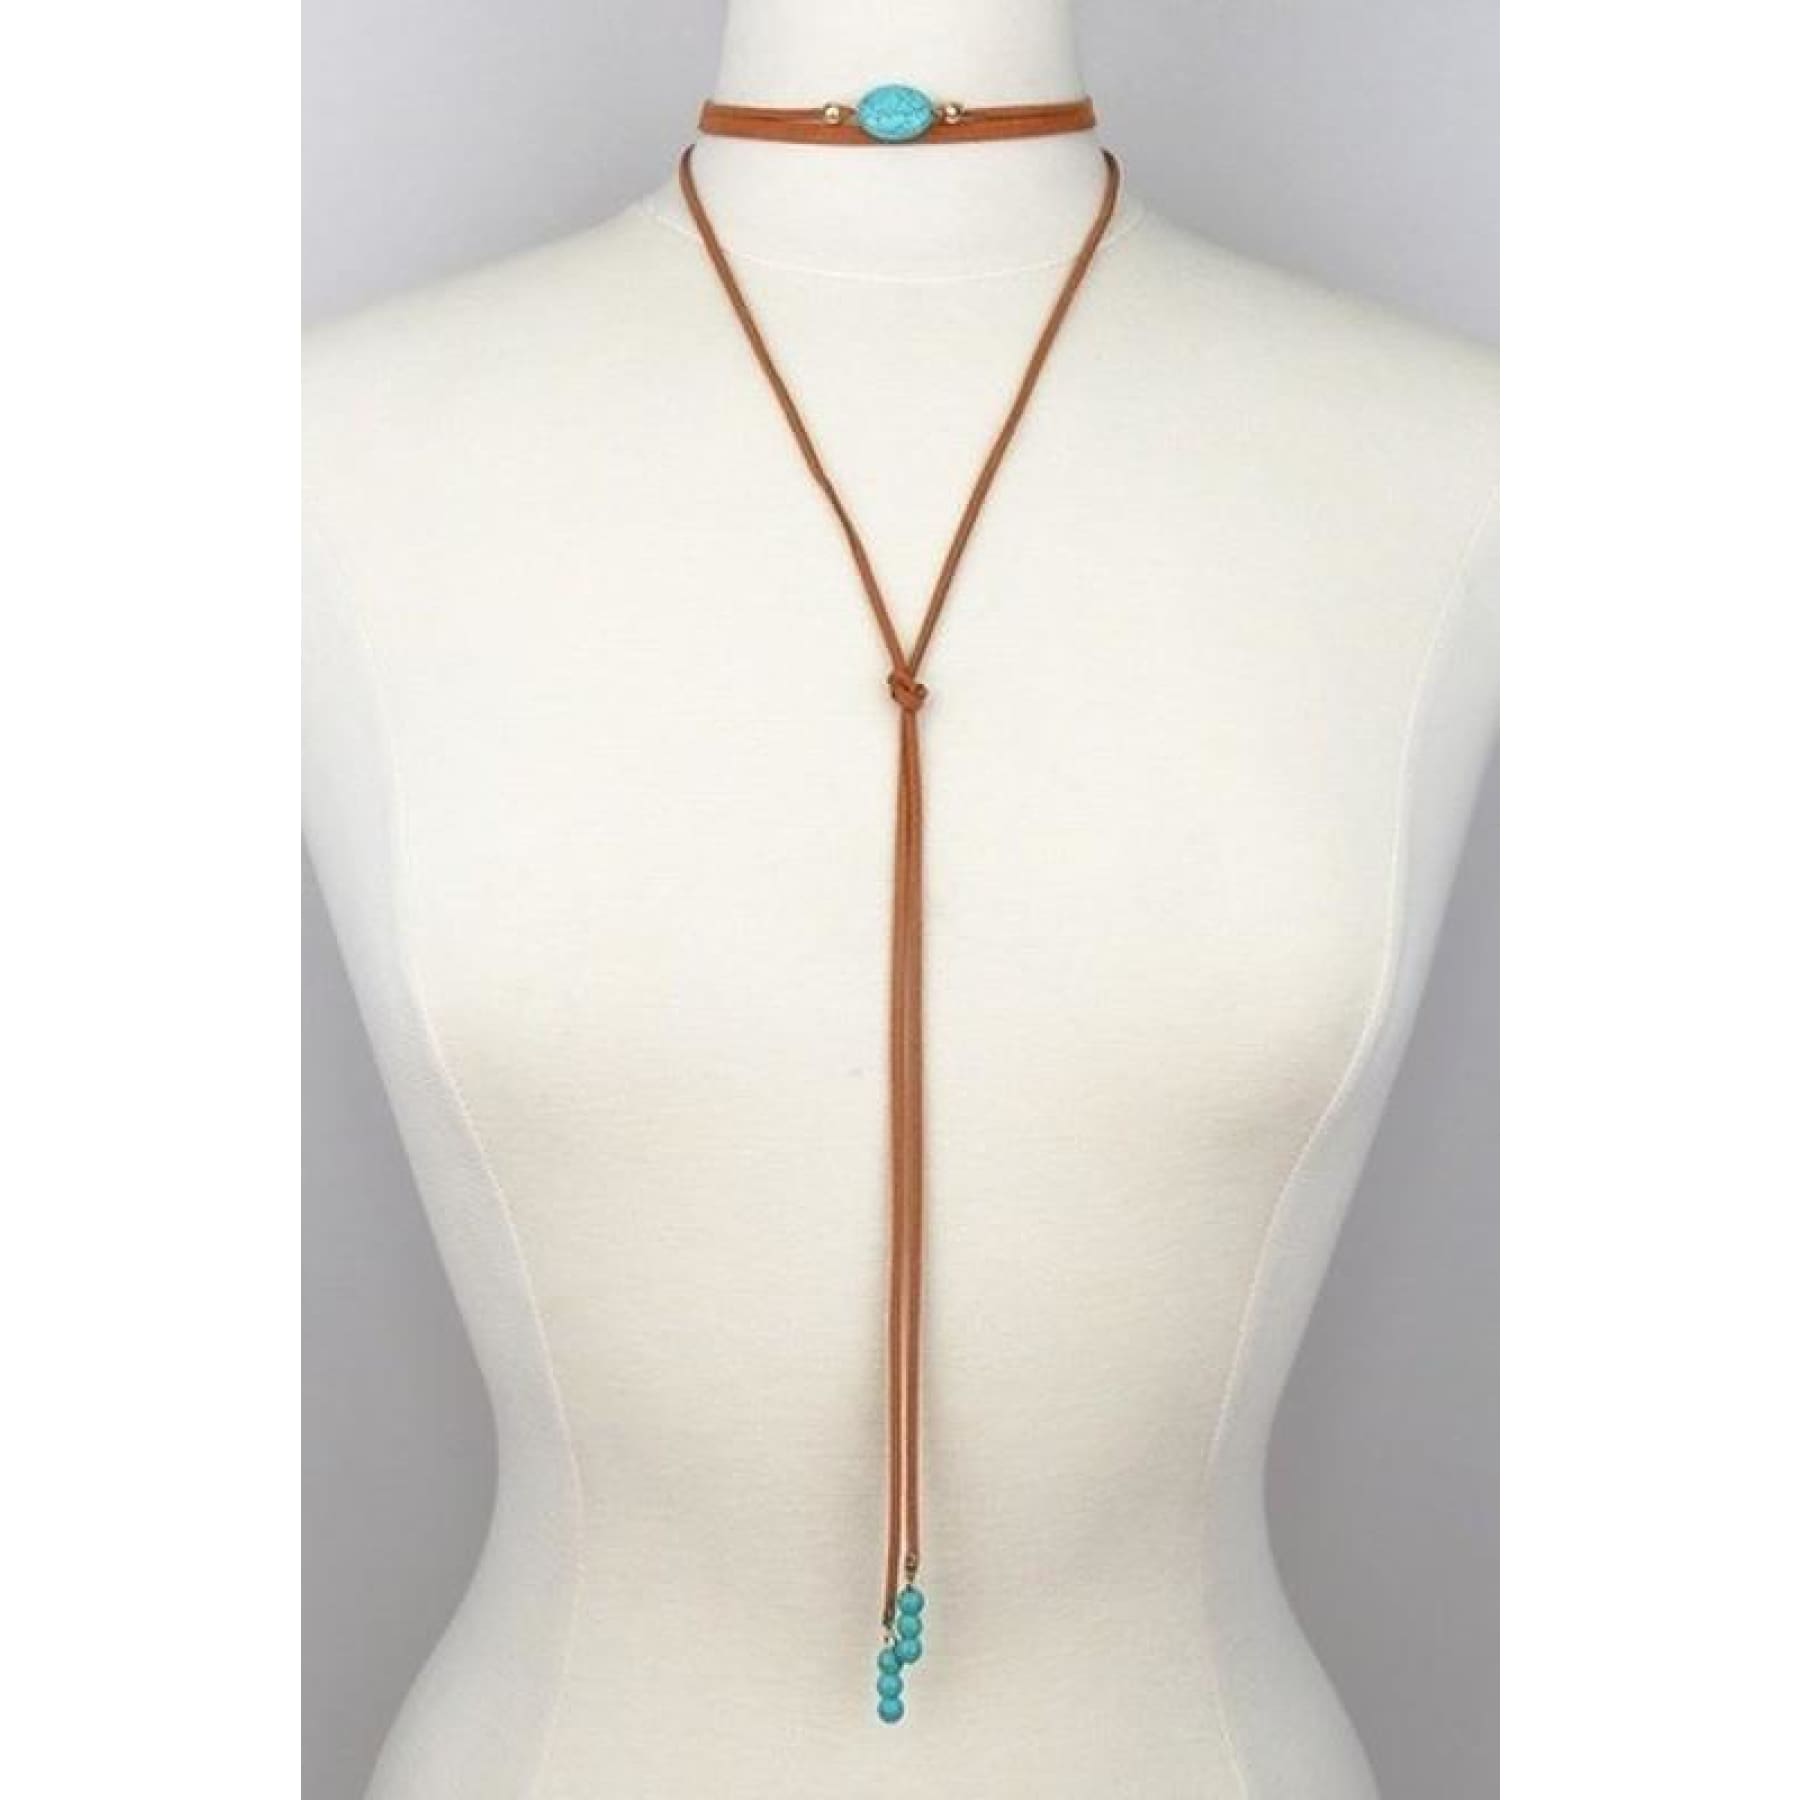 Oval Stone~ Suede and Turquoise Wrap Choker,Necklace - Dirt Road Divas Boutique